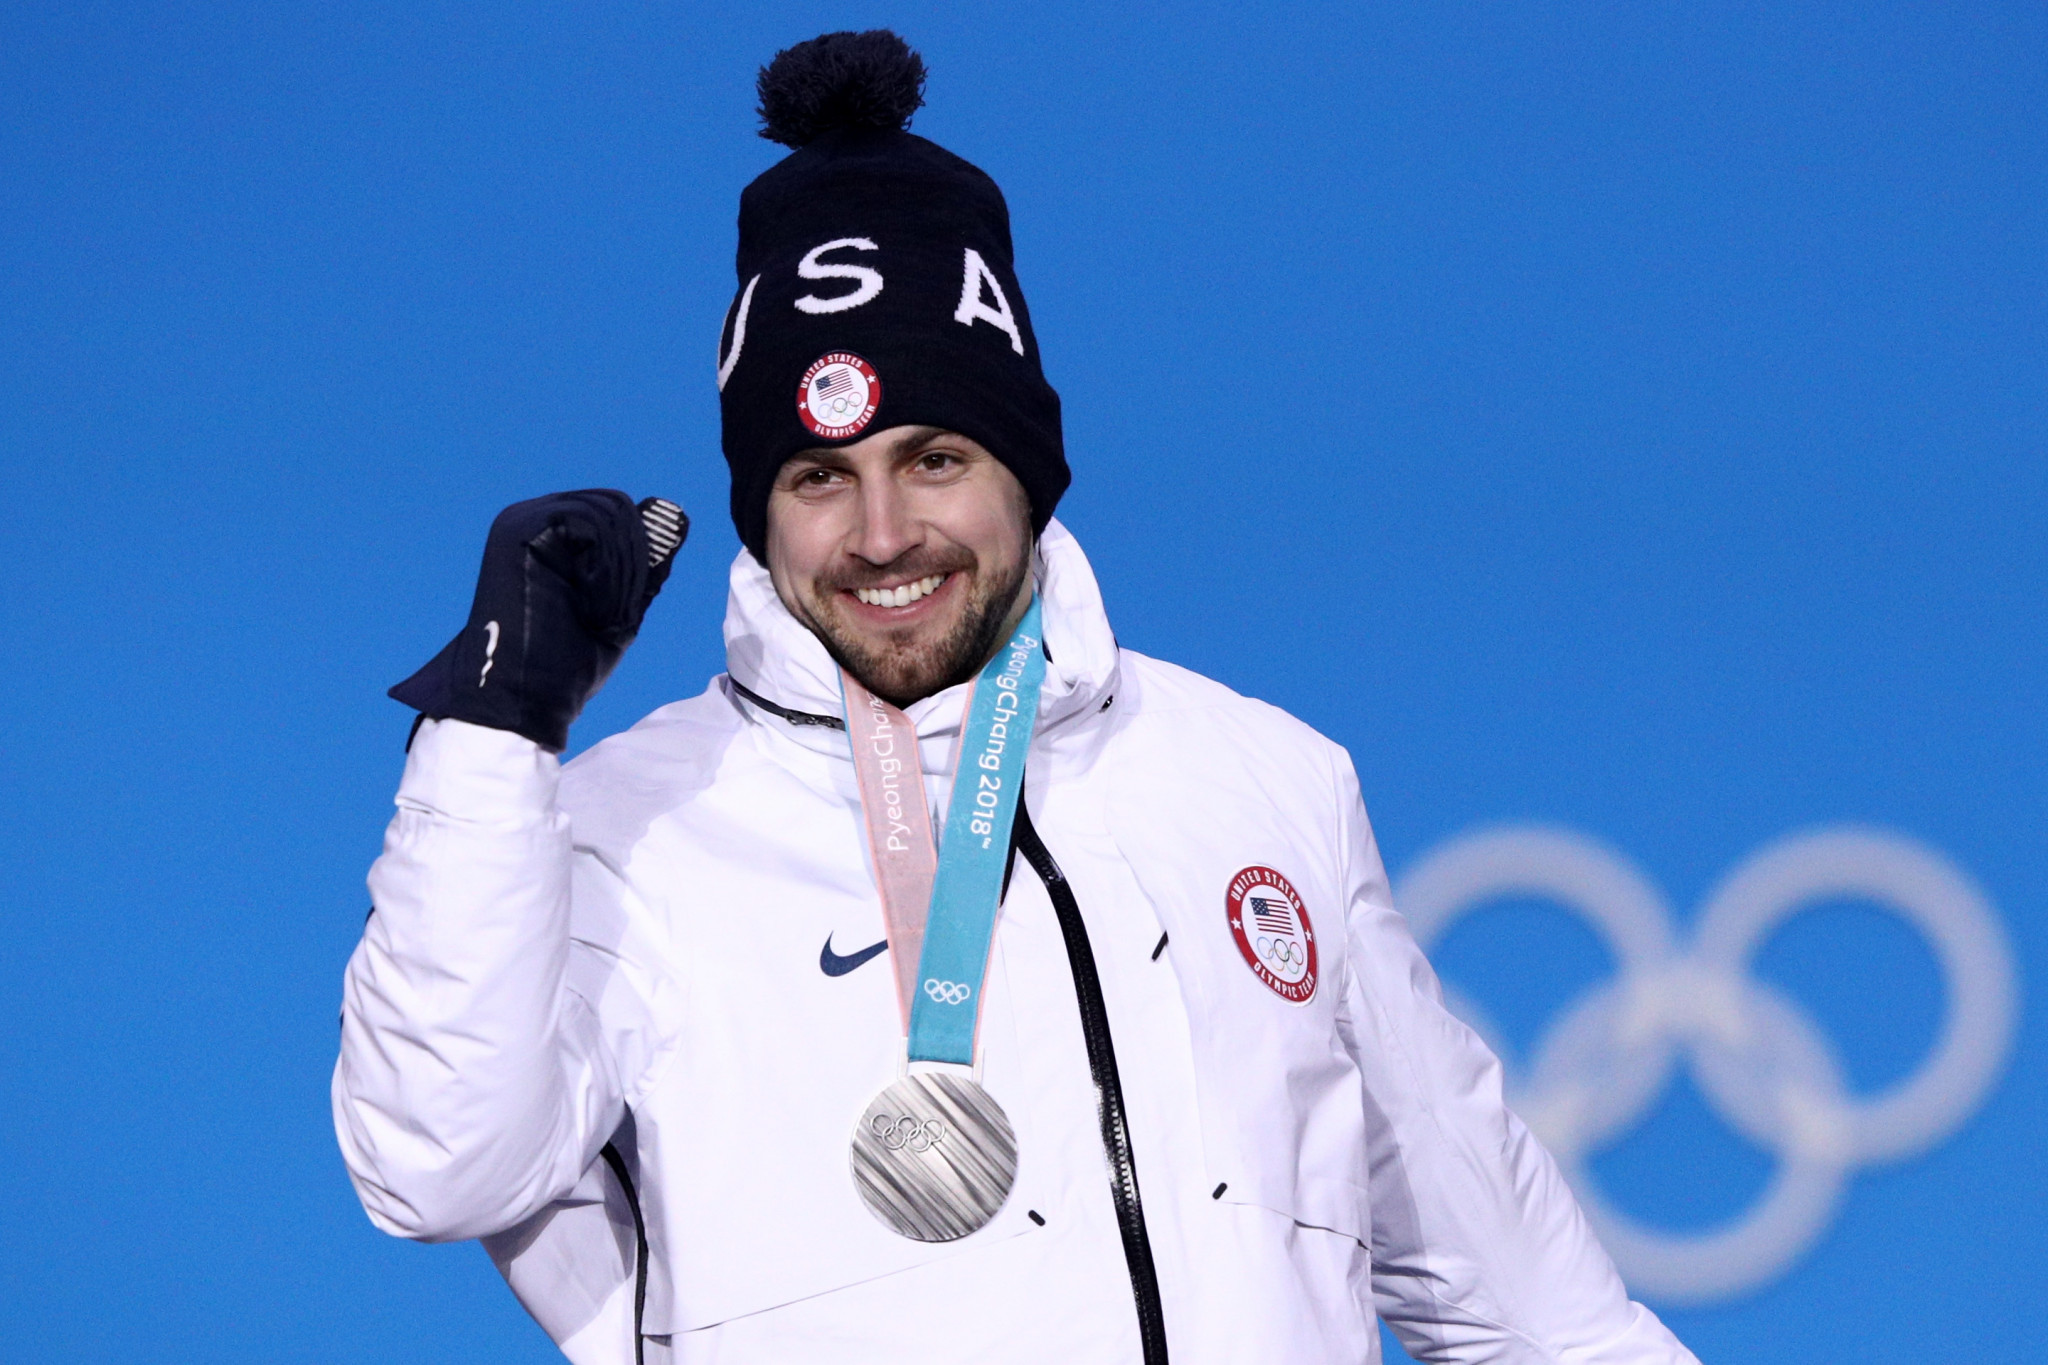 Chris Mazdzer won a silver medal at Pyeongchang 2018, the United States' only luge medal at the Games ©Getty Images